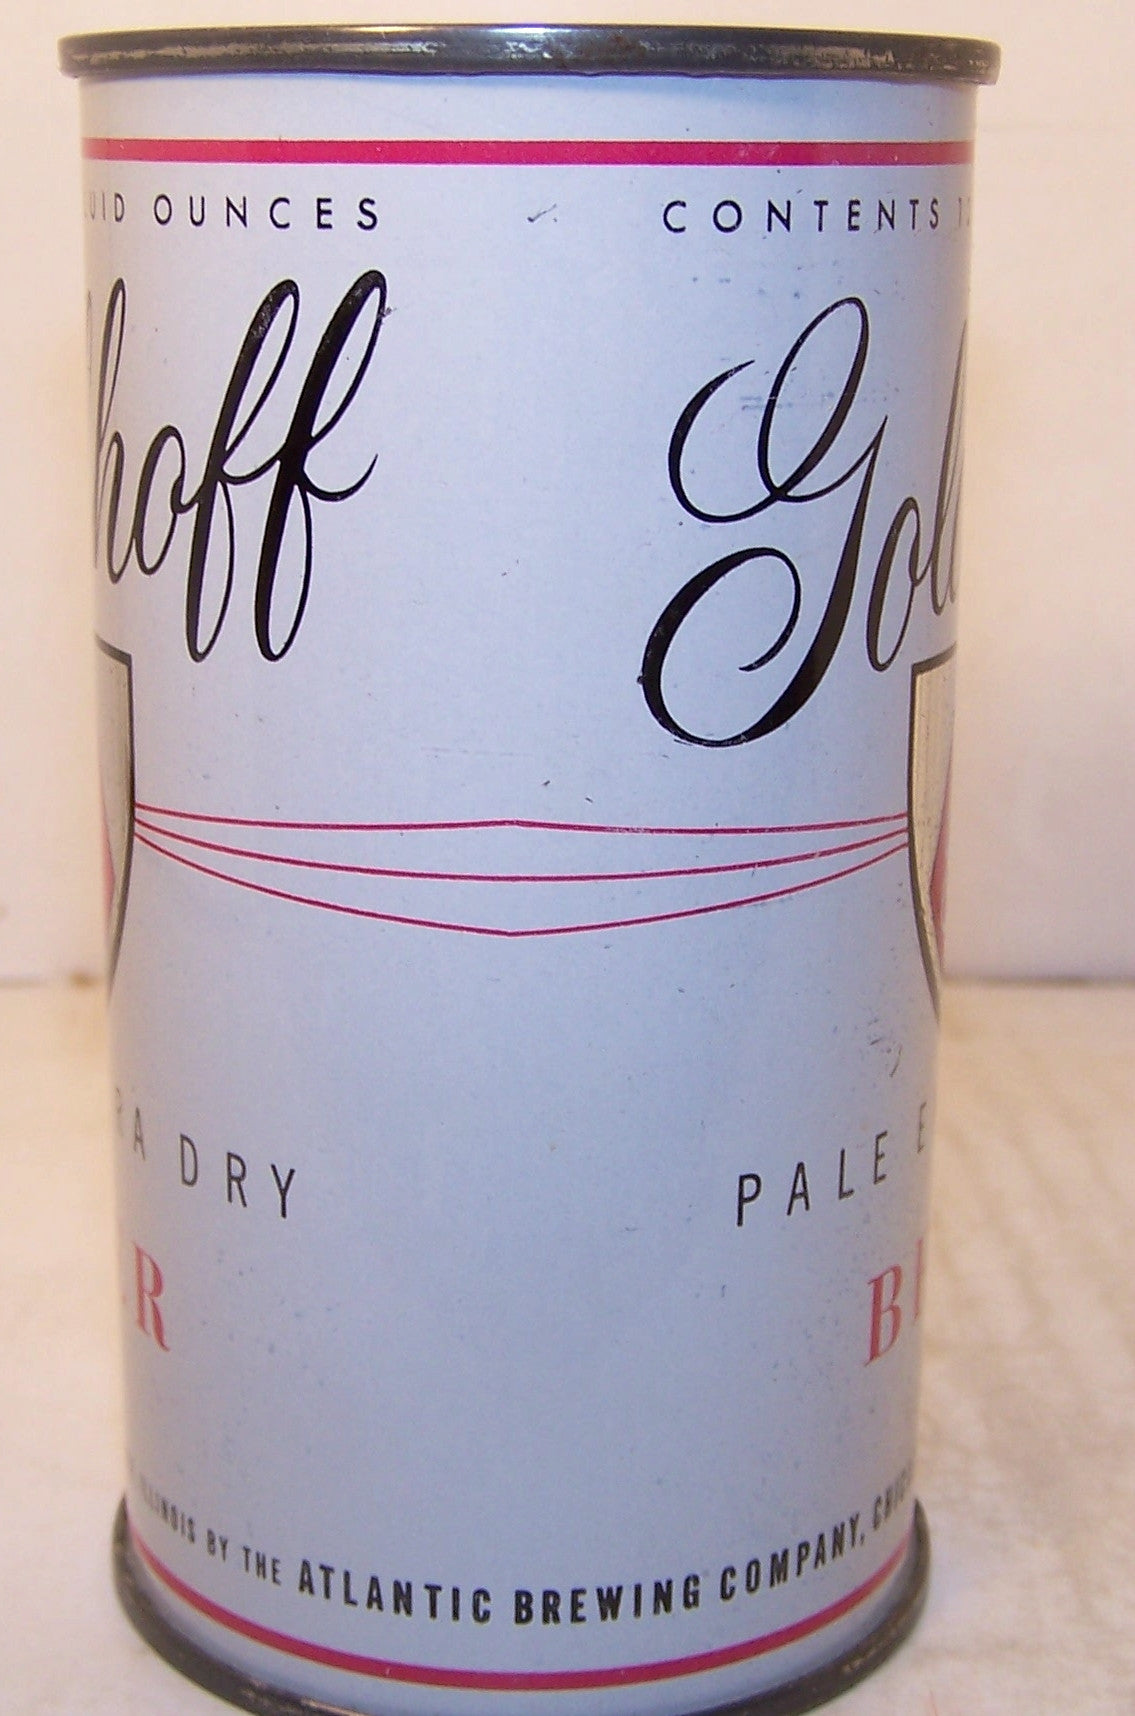 Goldhoff Pale Extra Dry Beer, USBC 71-39, Grade 1